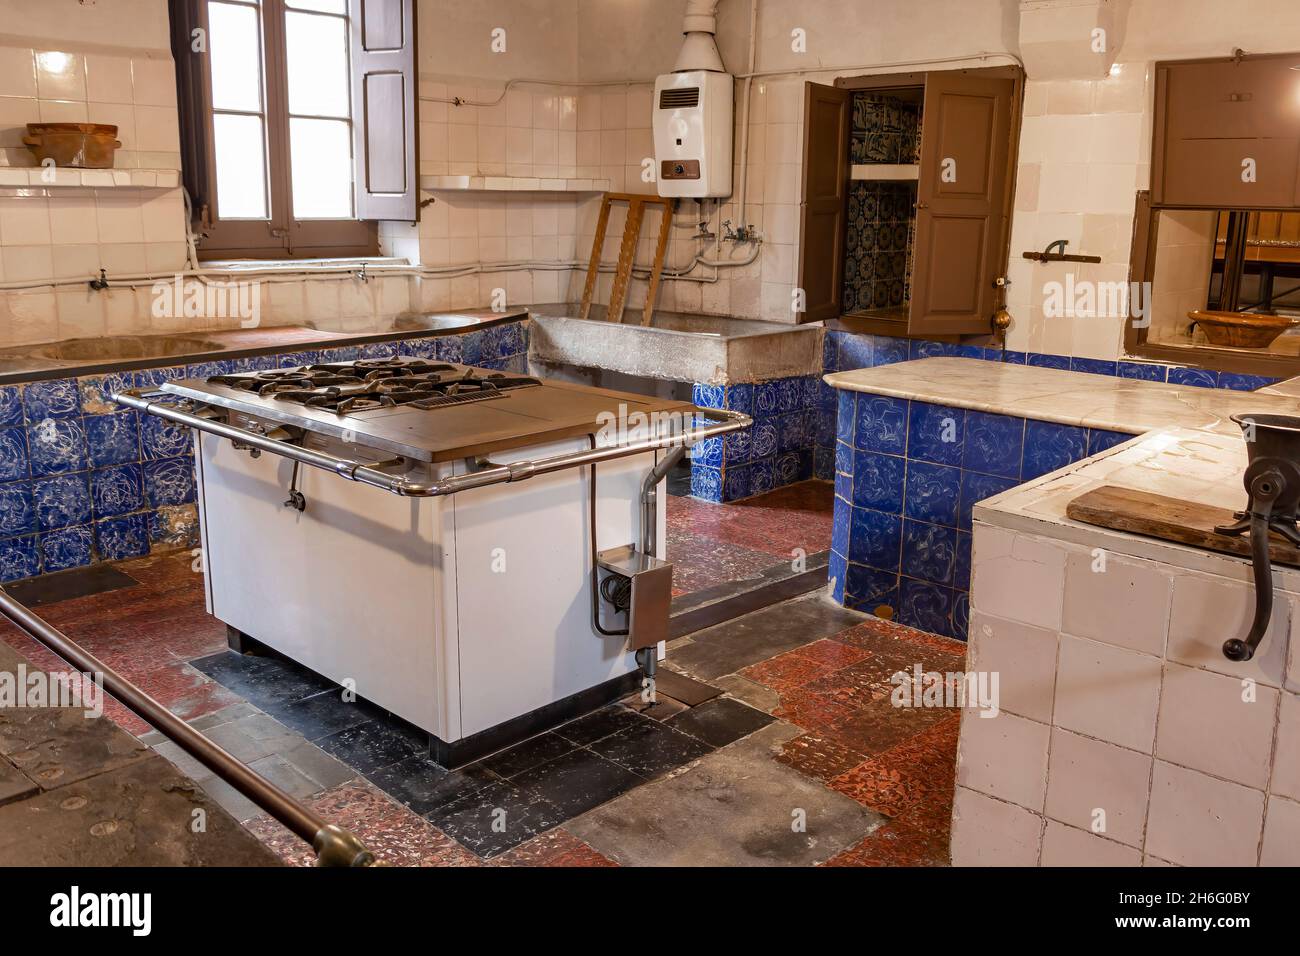 Barcelona, Spain - September 24, 2021: The kitchen inside the Pedralbes monastery. It is one of the areas of the monastery which best reflects the pas Stock Photo